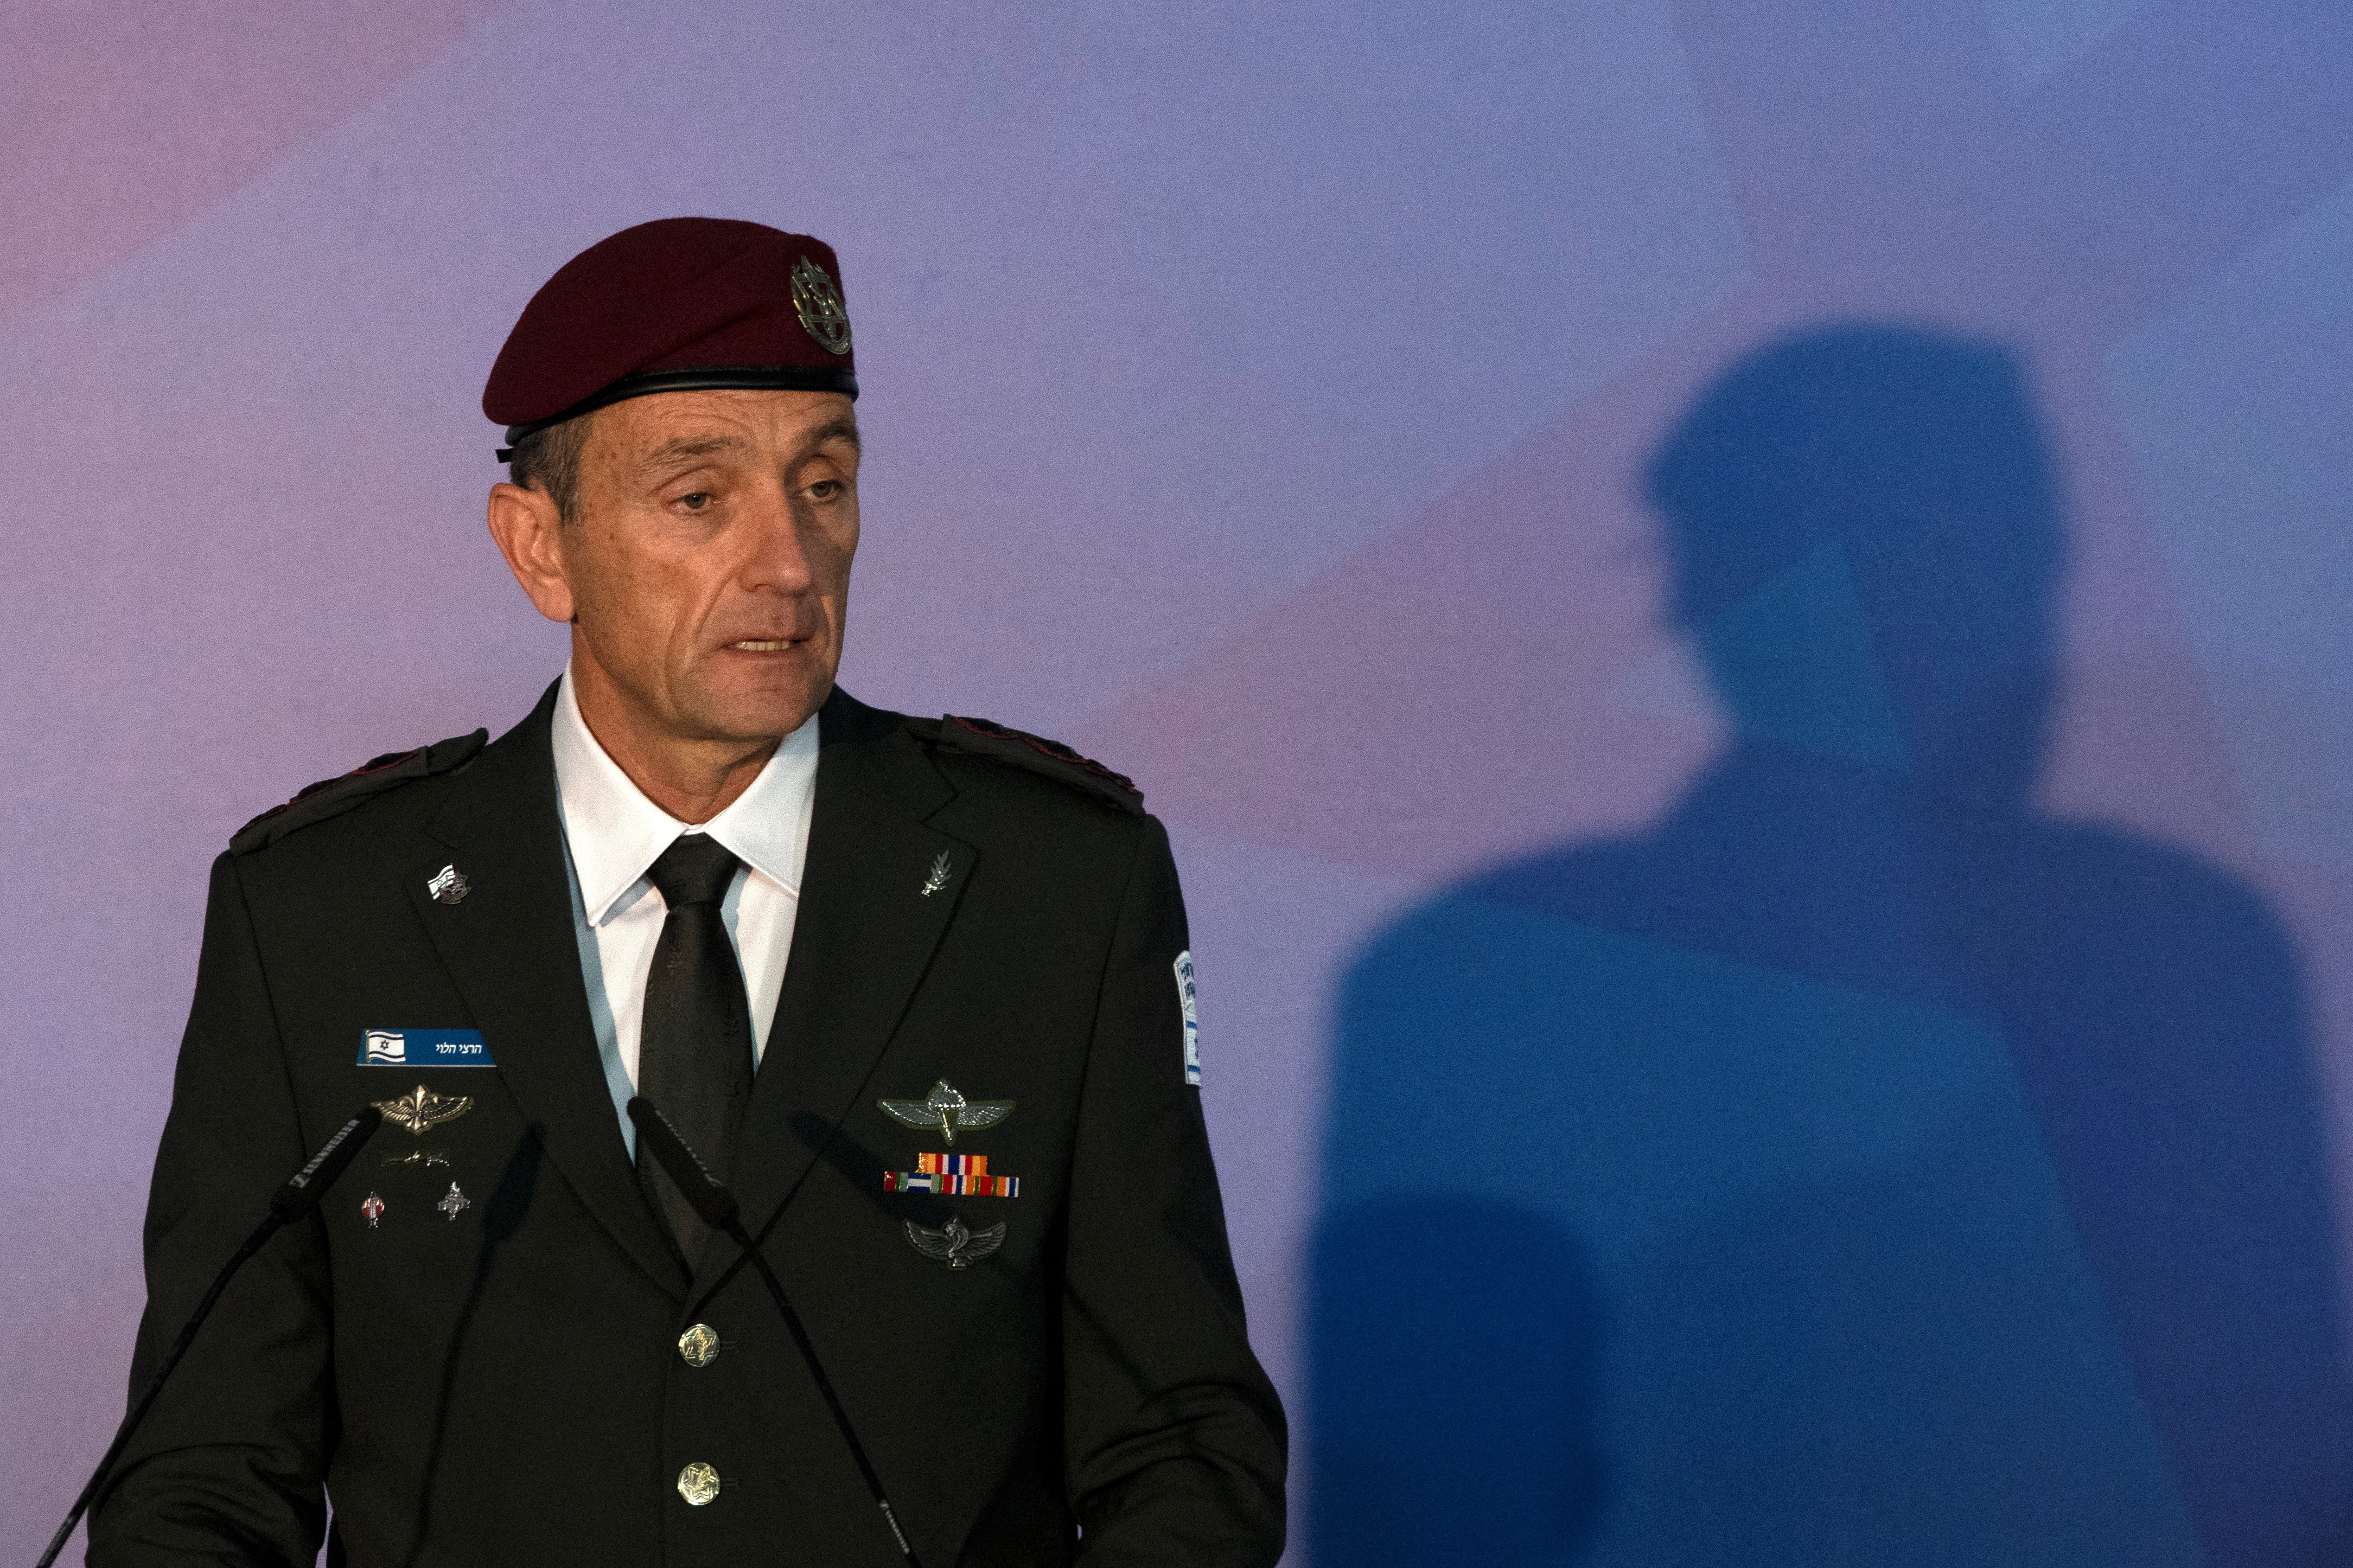 srael Defense Forces Chief of Staff Herzi Halevi speaks during his transition ceremony with the Prime Minister, Defense Minister, and the outgoing chief, in Jerusalem